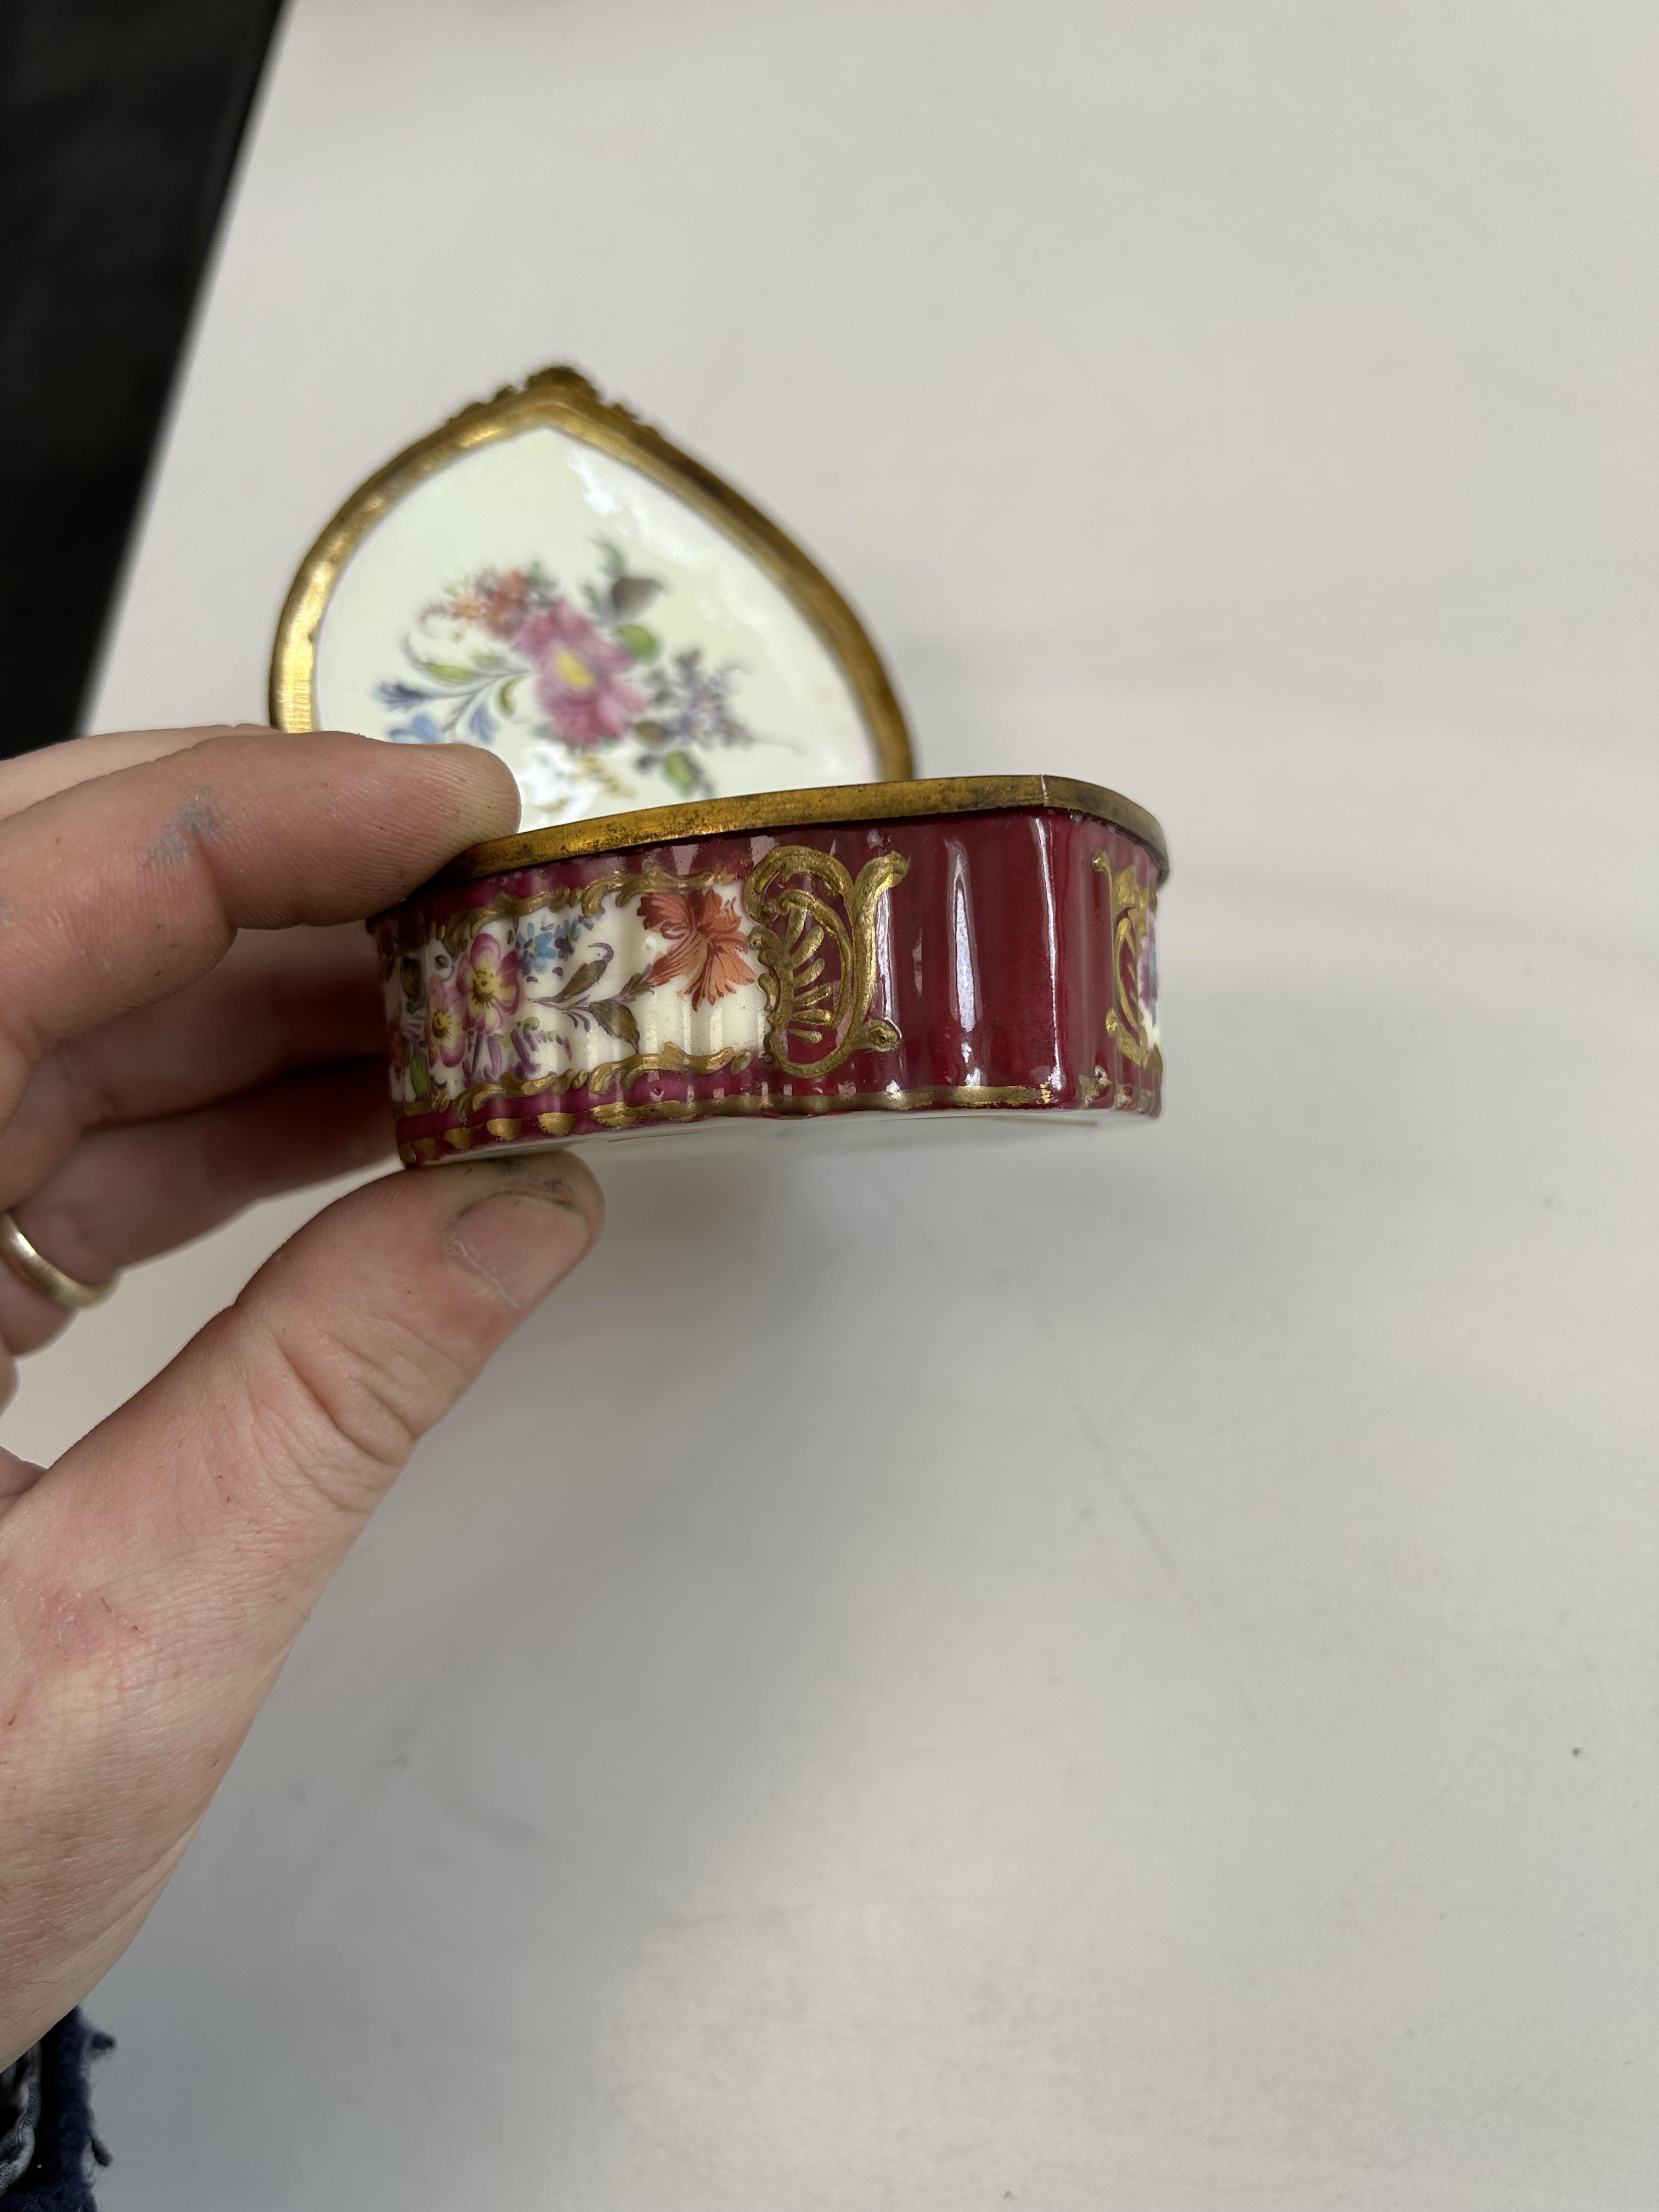 Two late 19th century Sevres style porcelain trinket boxes - Image 4 of 7